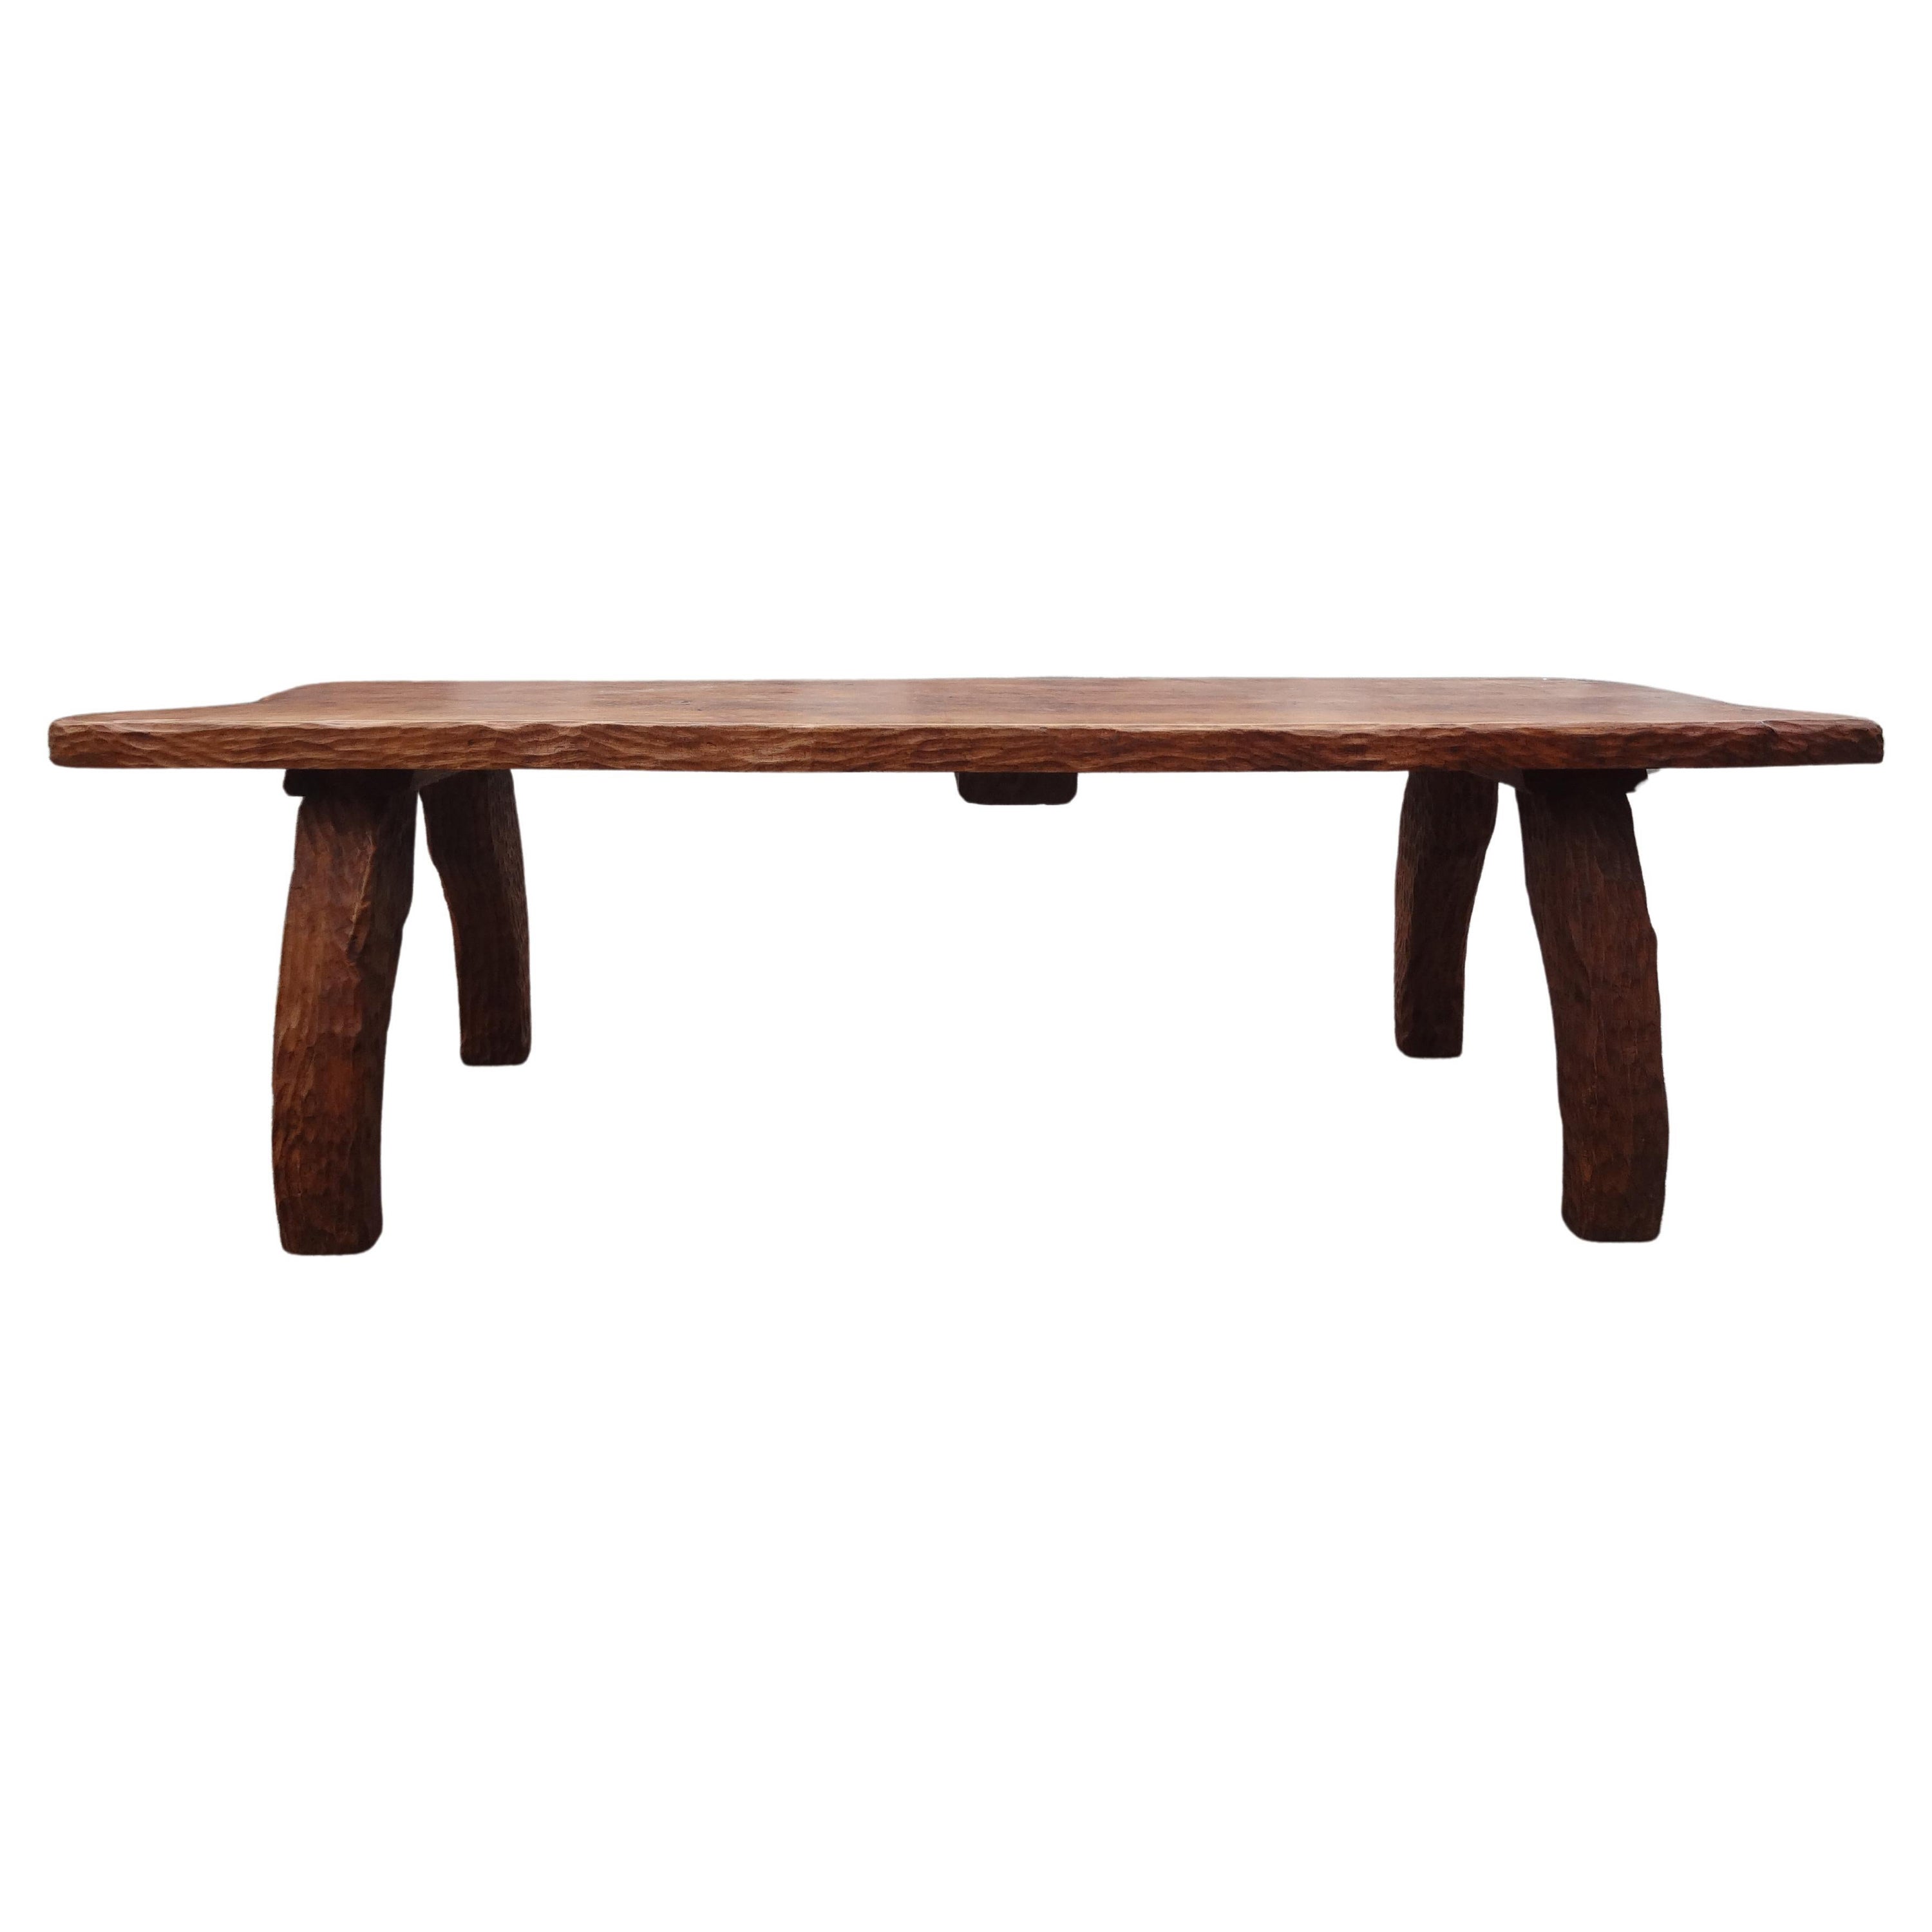 French Brutalist Elm Dining Table Or Center Table By Atelier Marolles For Sale